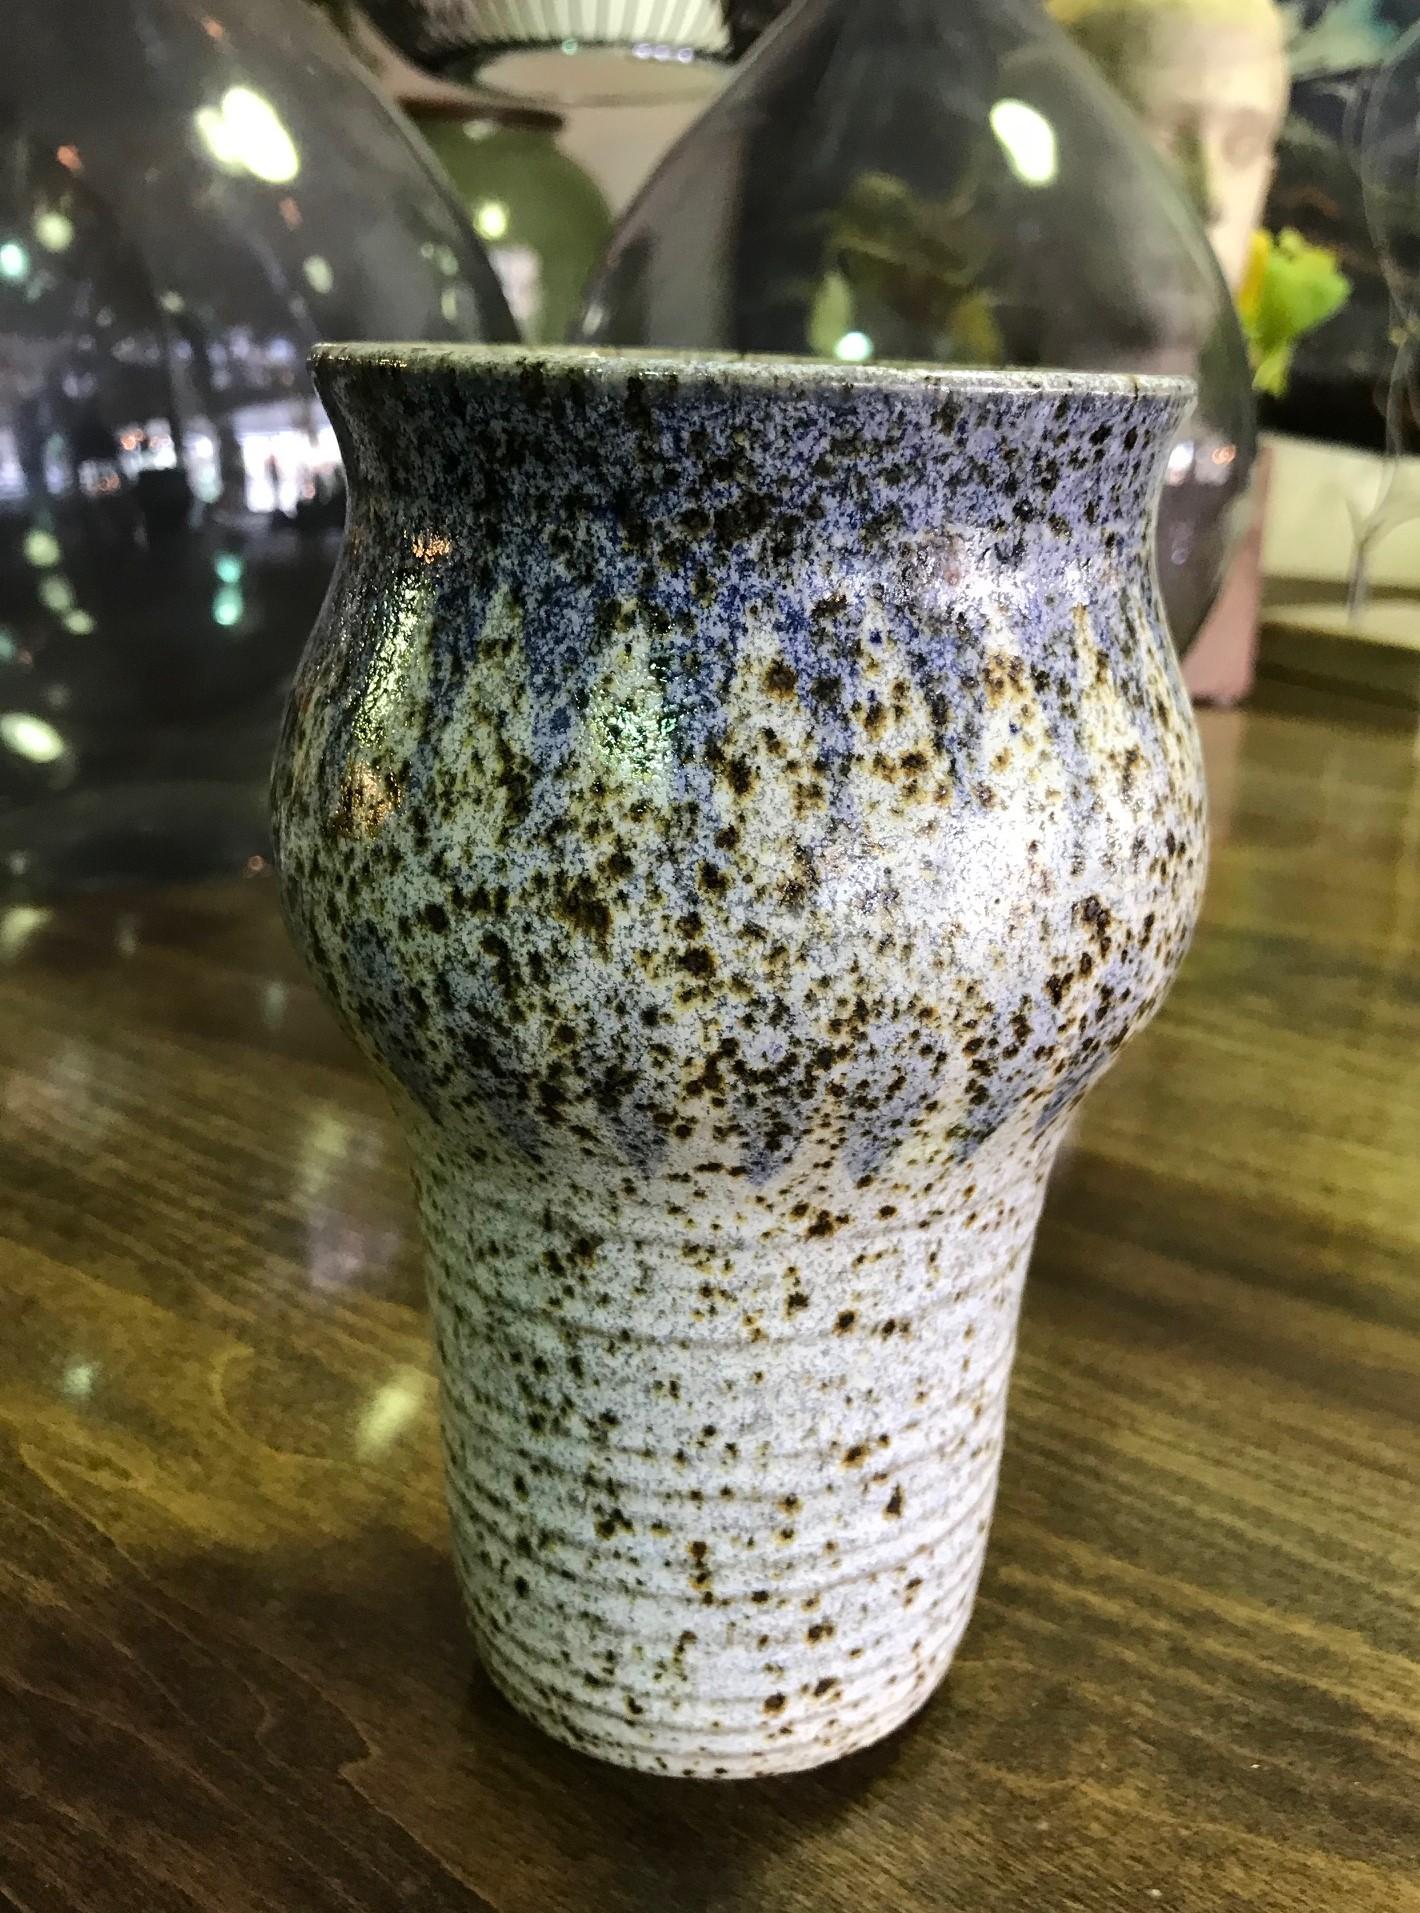 A beautifully made and wonderfully designed midcentury pottery vase by famed California ceramic artist Robert Maxwell featuring a rare blue drip glaze and deep rich colors.

Maxwell, who initially gained notoriety for his hugely popular and